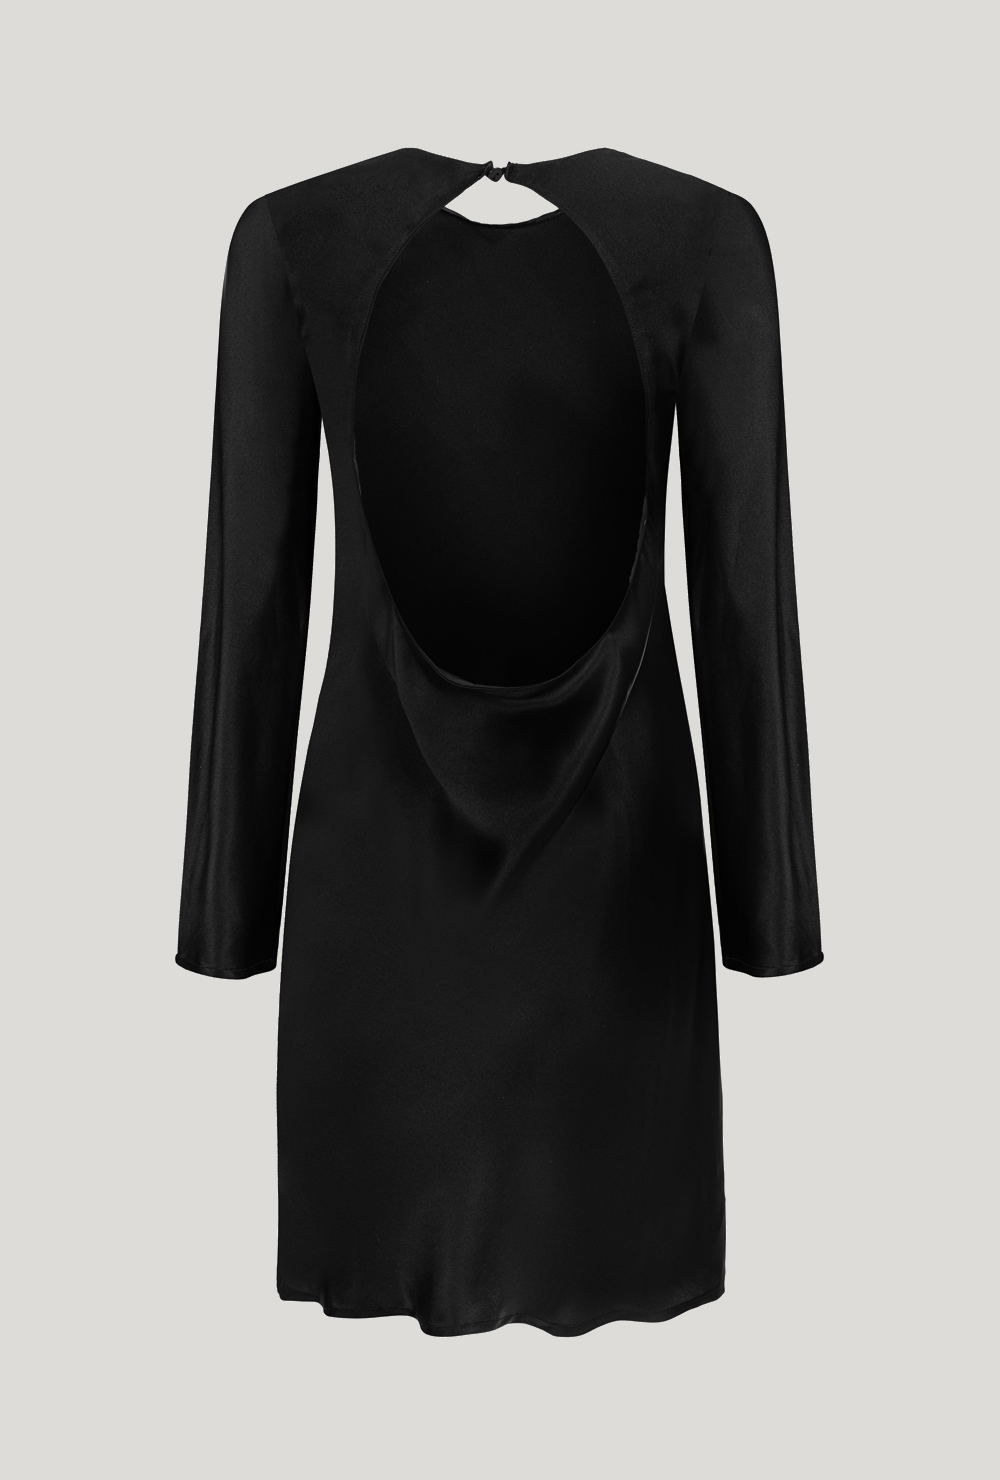 Black silk mini dress with long sleeves and cutout on the back